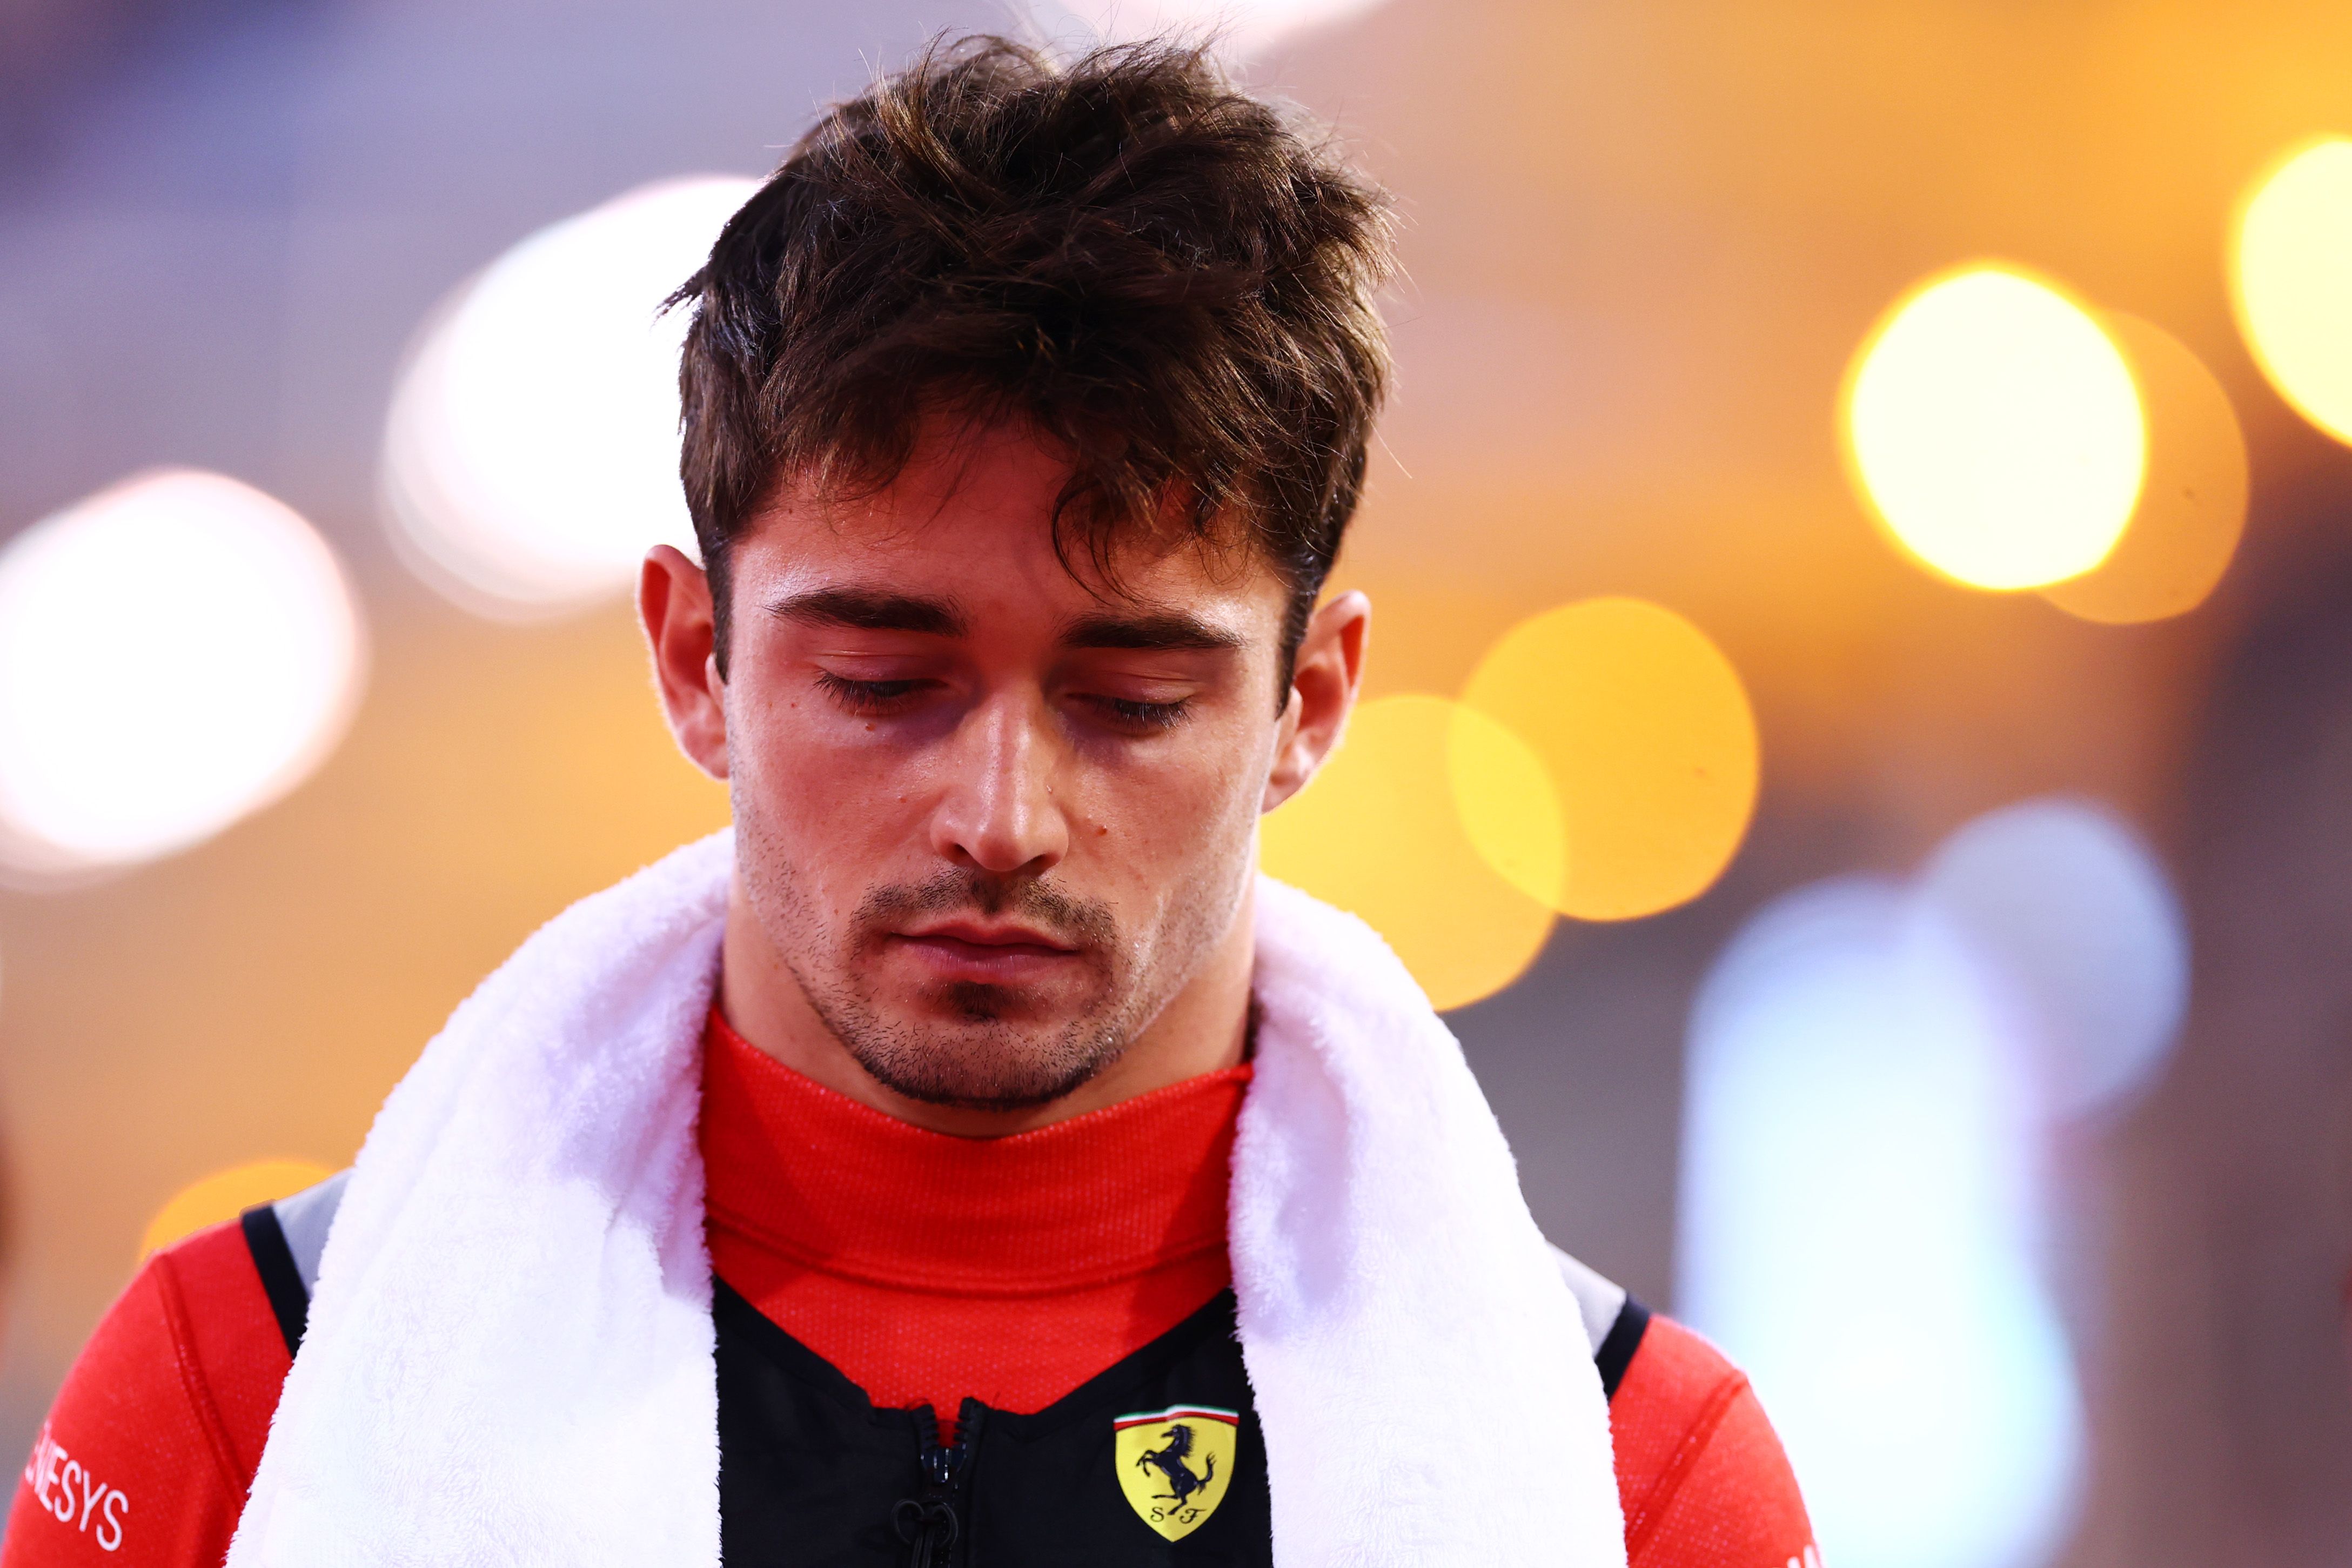 https://hips.hearstapps.com/hmg-prod/images/charles-leclerc-of-monaco-and-ferrari-prepares-to-drive-on-news-photo-1678984536.jpg